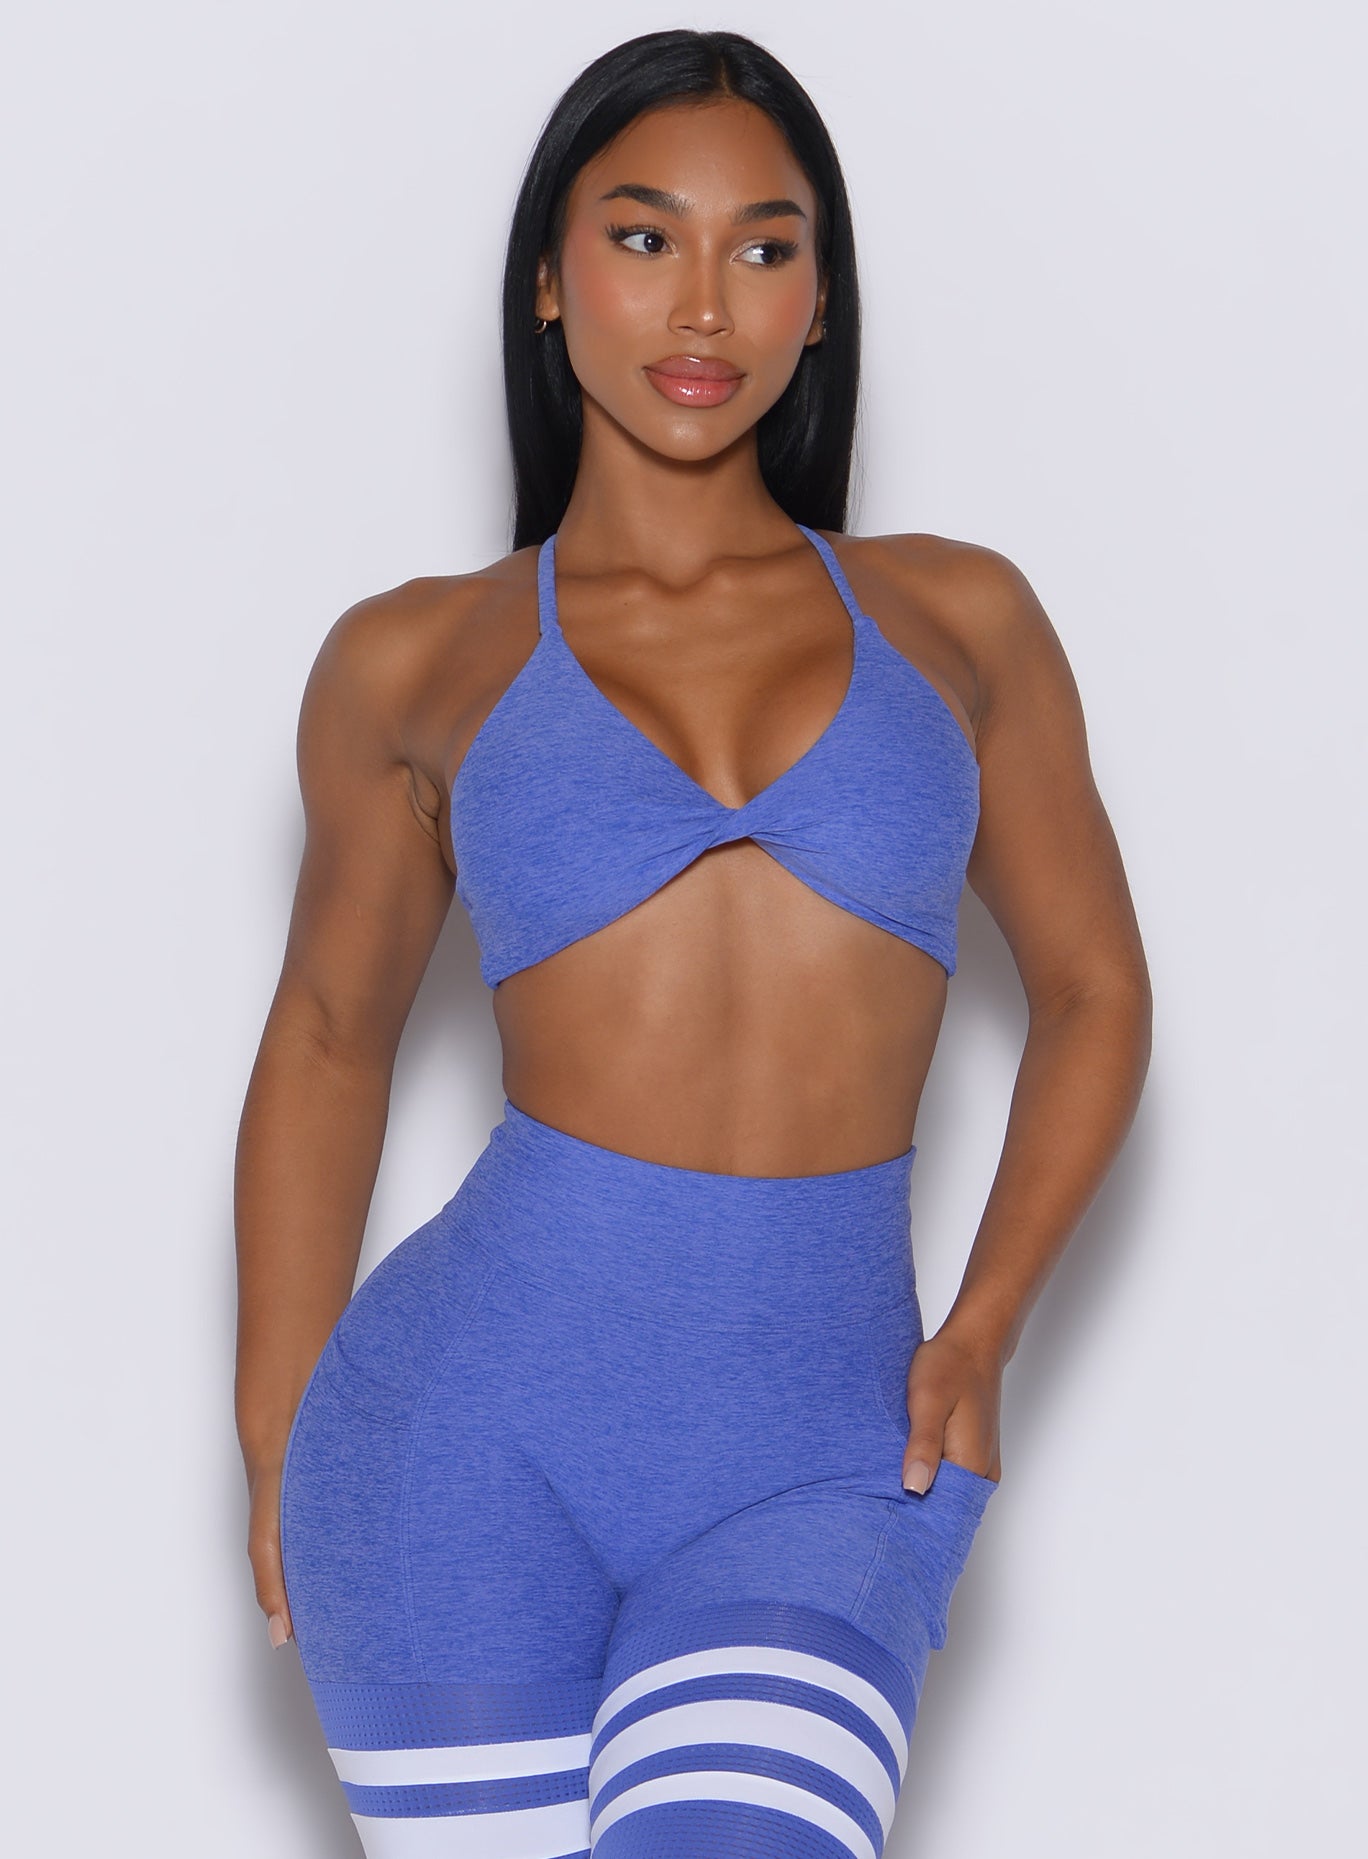 A front profile view of a model facing forward while wearing our twist mini bra in violet blue, paired with matching thigh-high leggings.